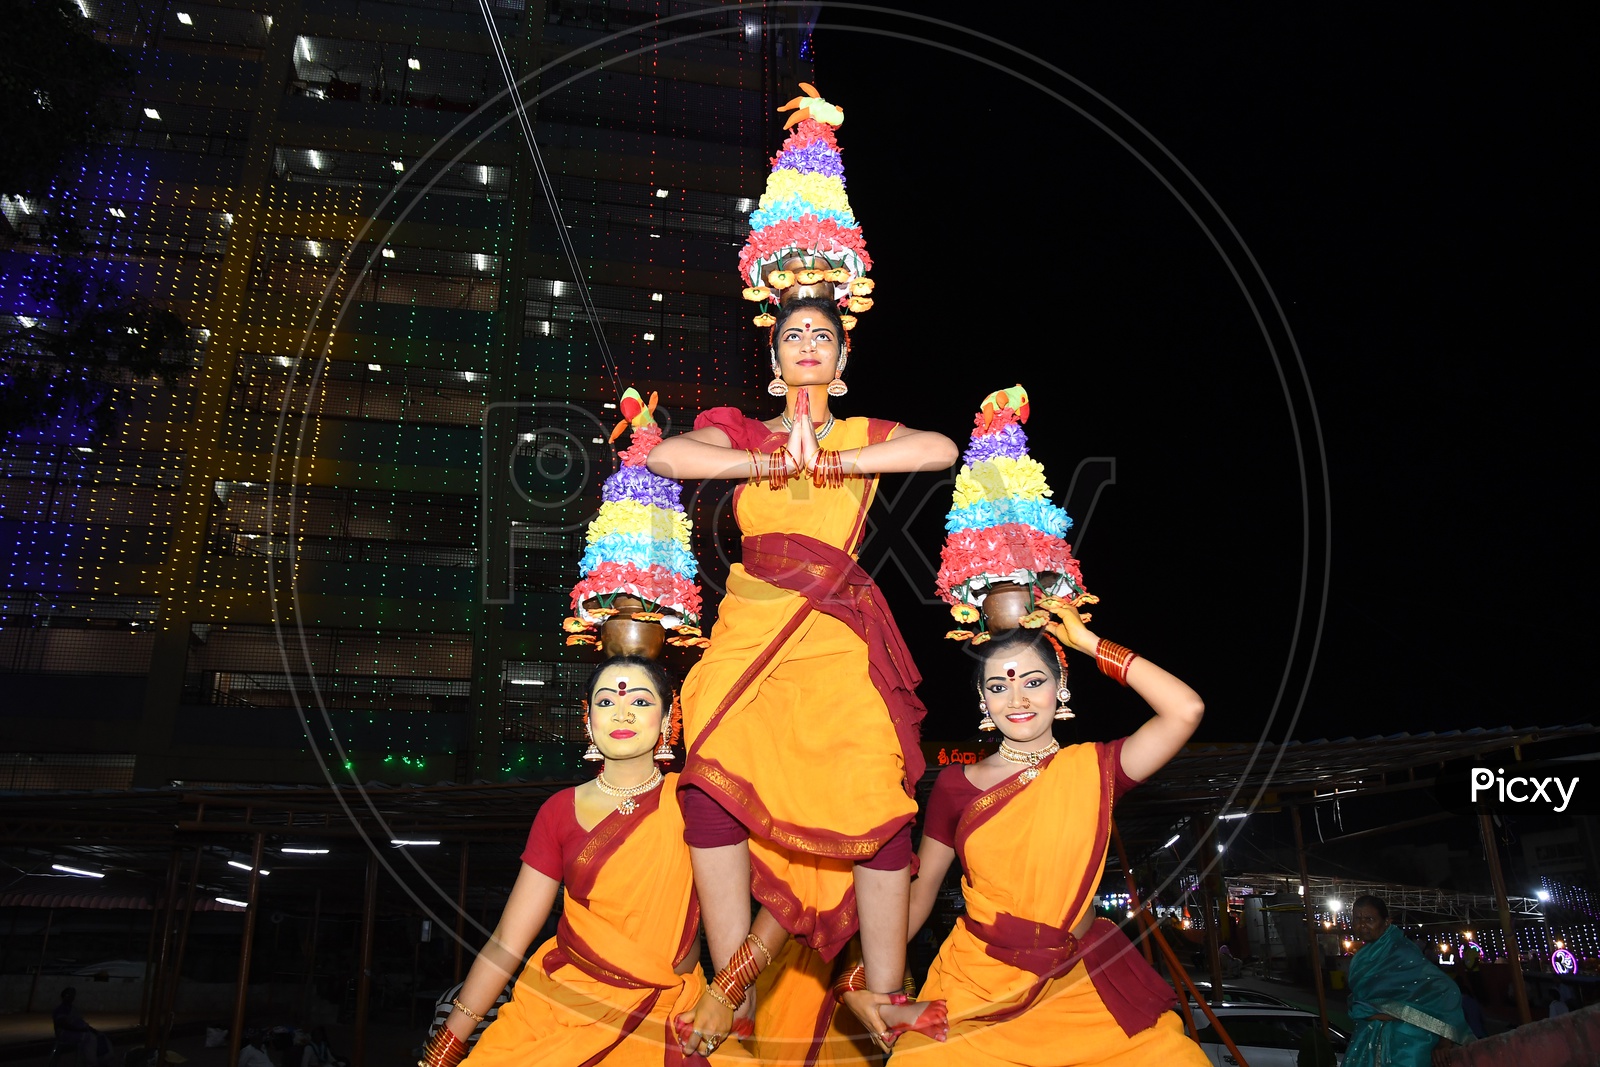 Indian Girls dancing with pots on their heads during Dussehra